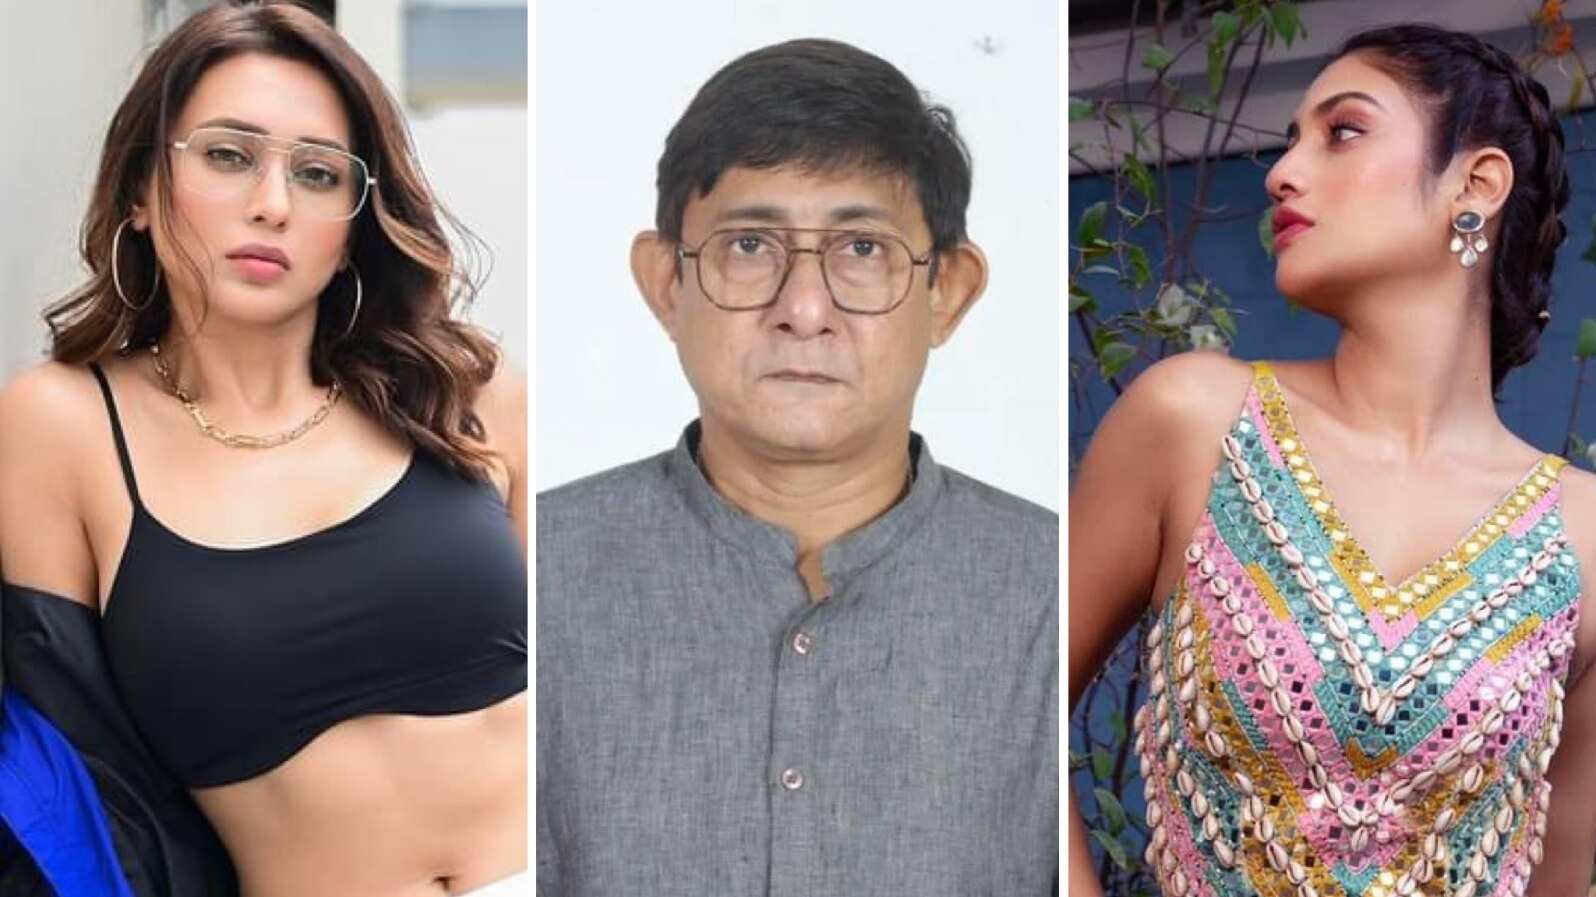 https://www.mobilemasala.com/film-gossip/Mimi-Chakraborty-Nusrat-Jahan-Kanchan-Mullick-and-Kaushani-are-not-on-the-companion-list-for-the-general-election-2024-i227566